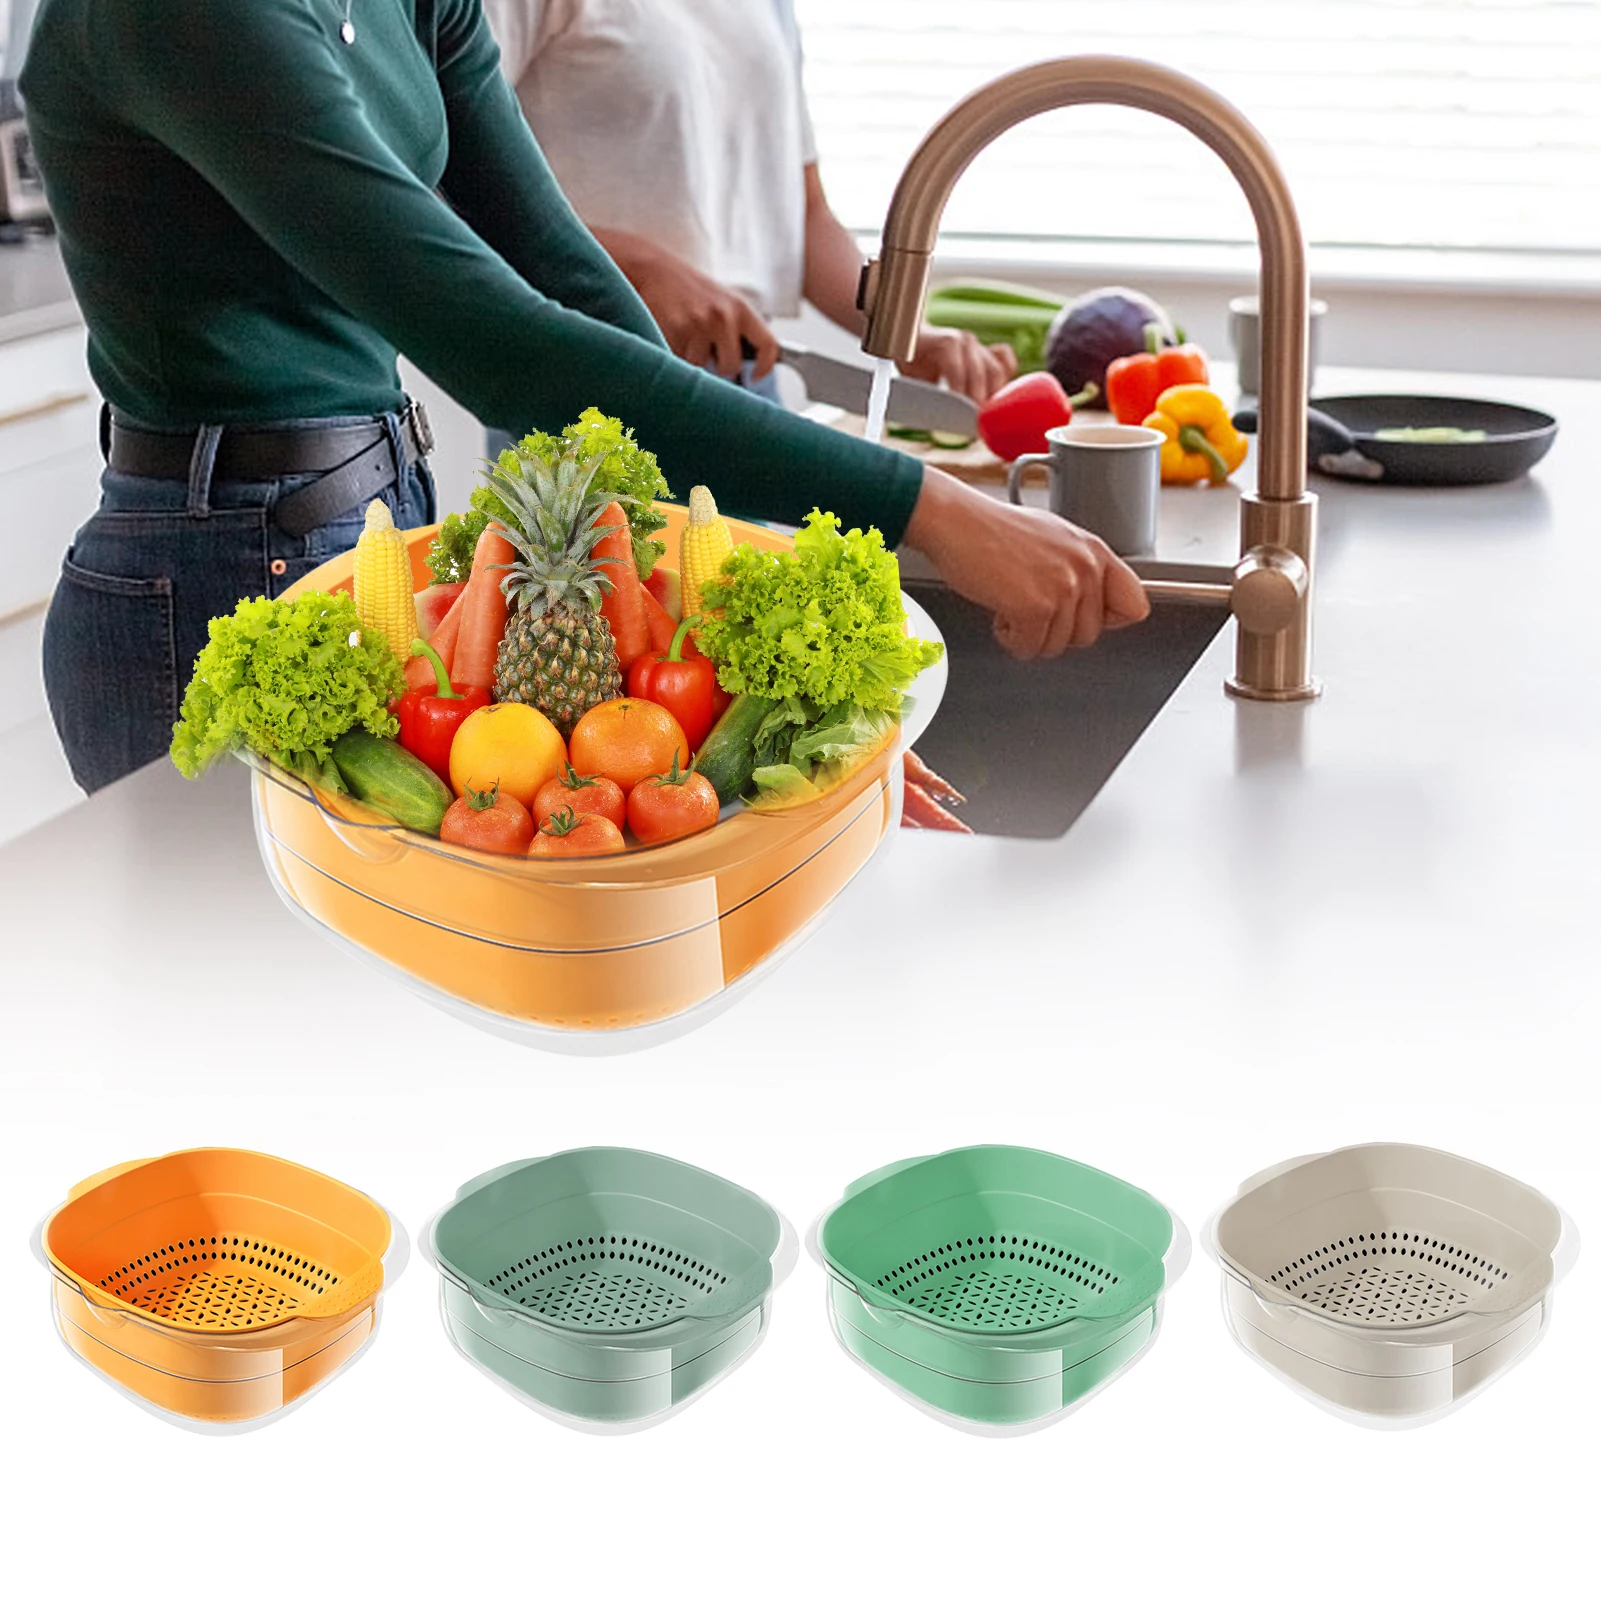 

Draining Bowl 2-in-1 Kit Kitchen Strainer Colander And Bowl Sets Pasta Drainer Basket Space-Saver For Fruits Vegetable Cleaning